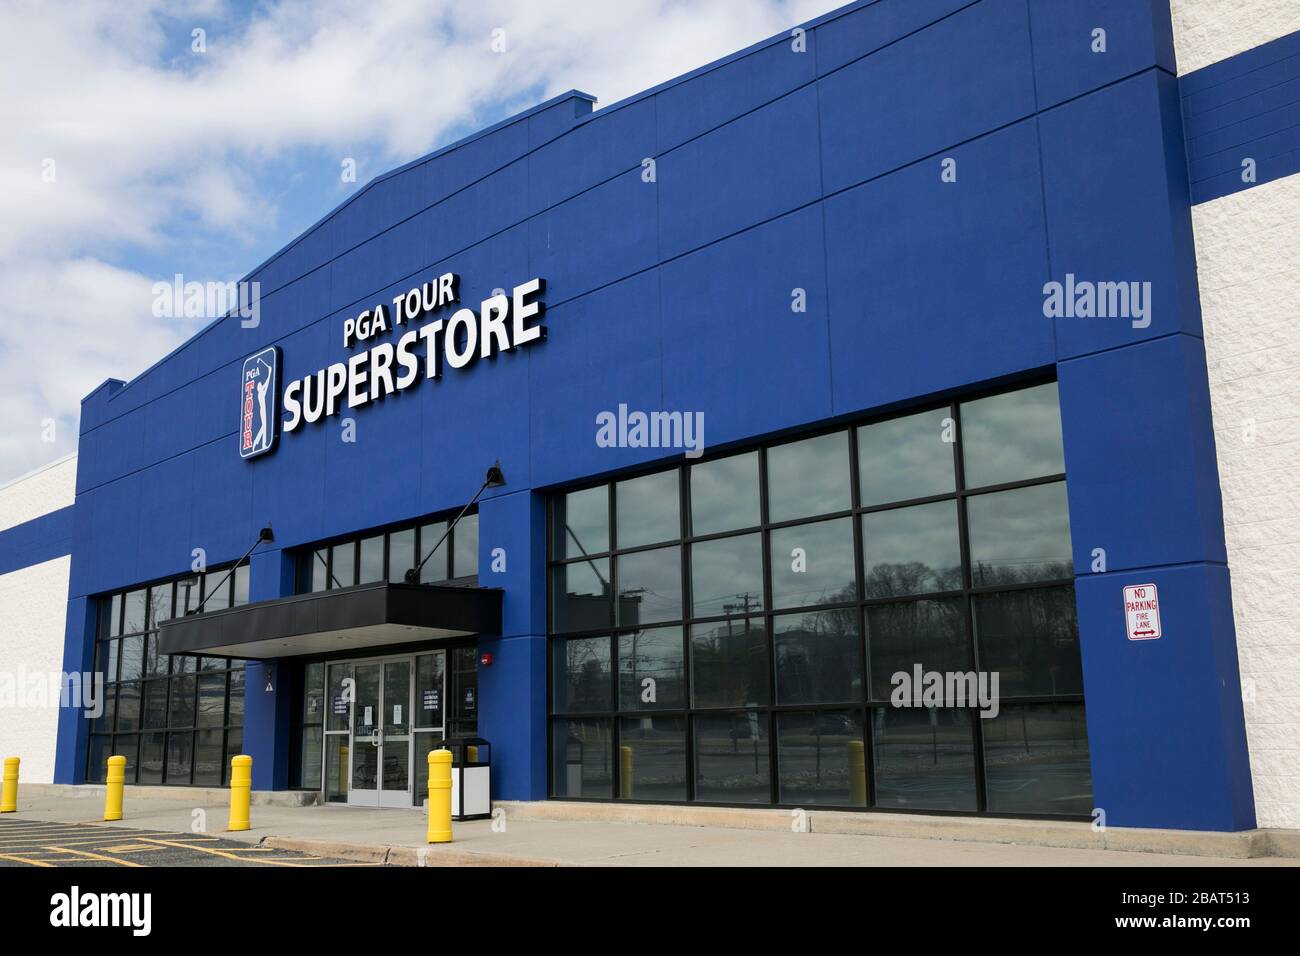 A logo sign outside of a PGA TOUR Superstore retail store location in East Hanover, New Jersey, on March 23, 2020. Stock Photo